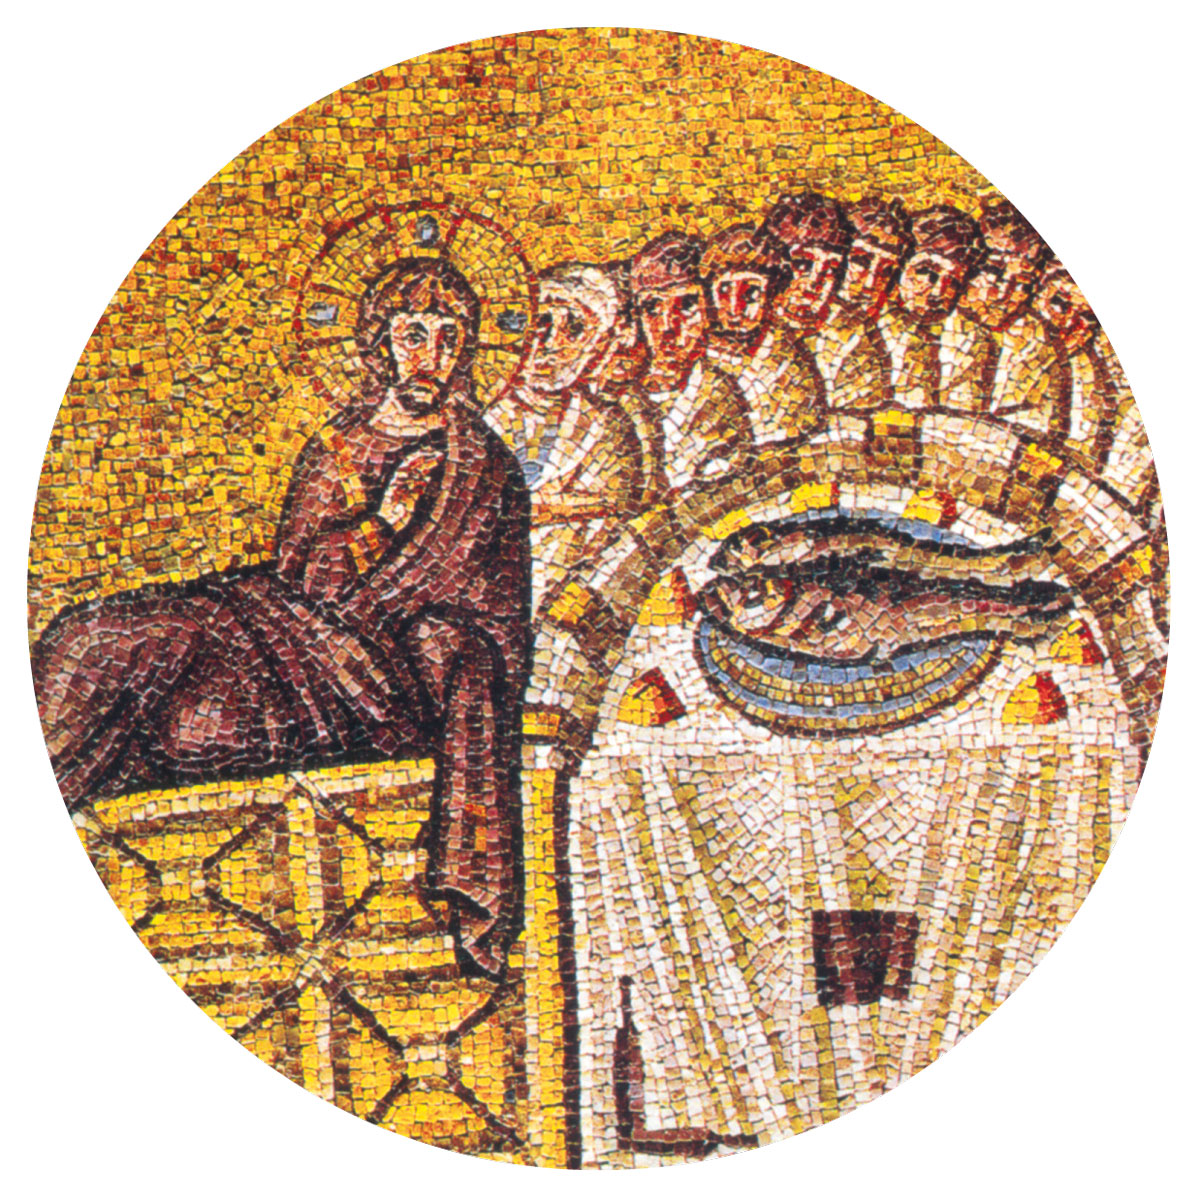 A detail from a sixth-century painting titled “The Last Supper.”